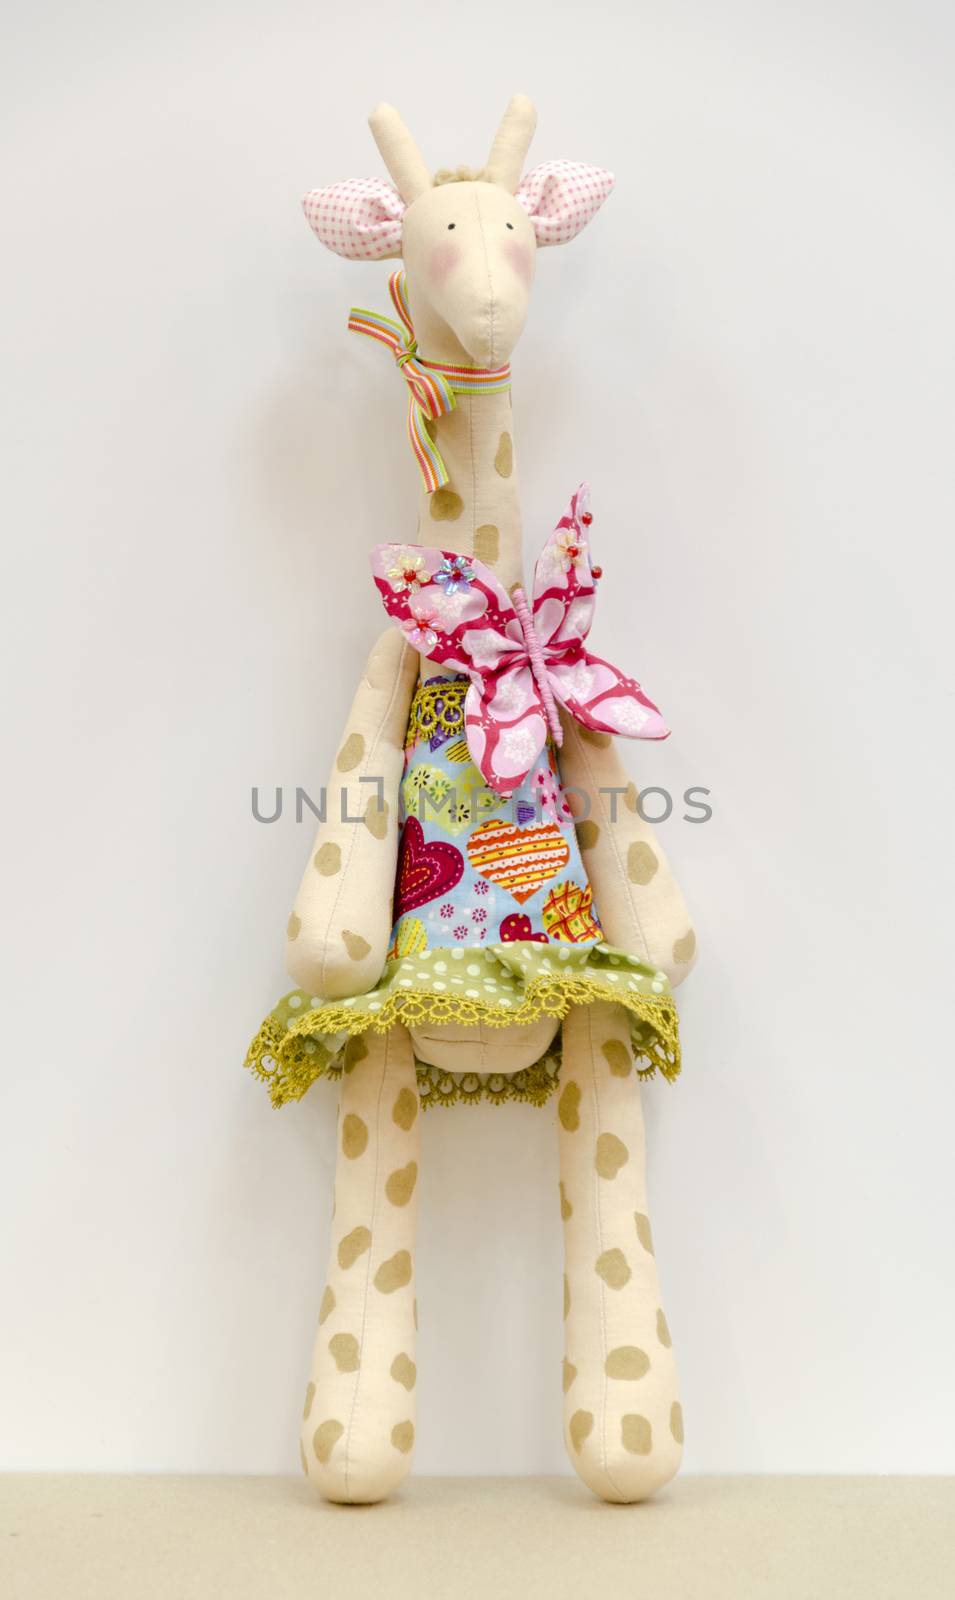 The Hand made soft toy giraffe isolated in a dress standing